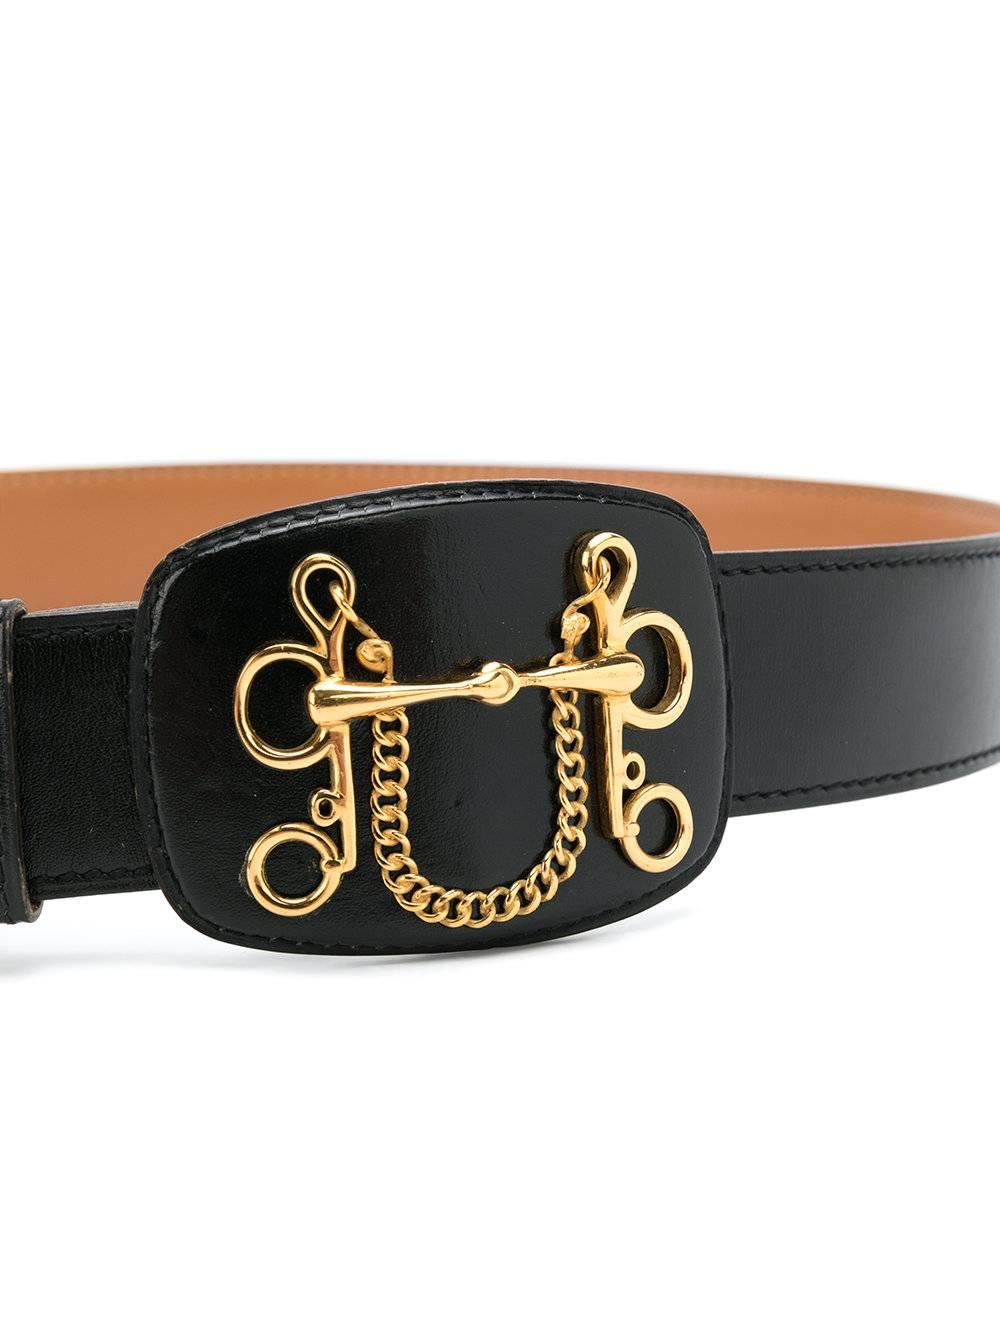 Black leather belt from Hermès Vintage featuring a clip fastening, gold-tone hardware and a narrow construction.

Material: Leather

One Size

Condition: Pre-owned, very good condition.
Light usage, with minor signs of wear-and-tear.

Returns